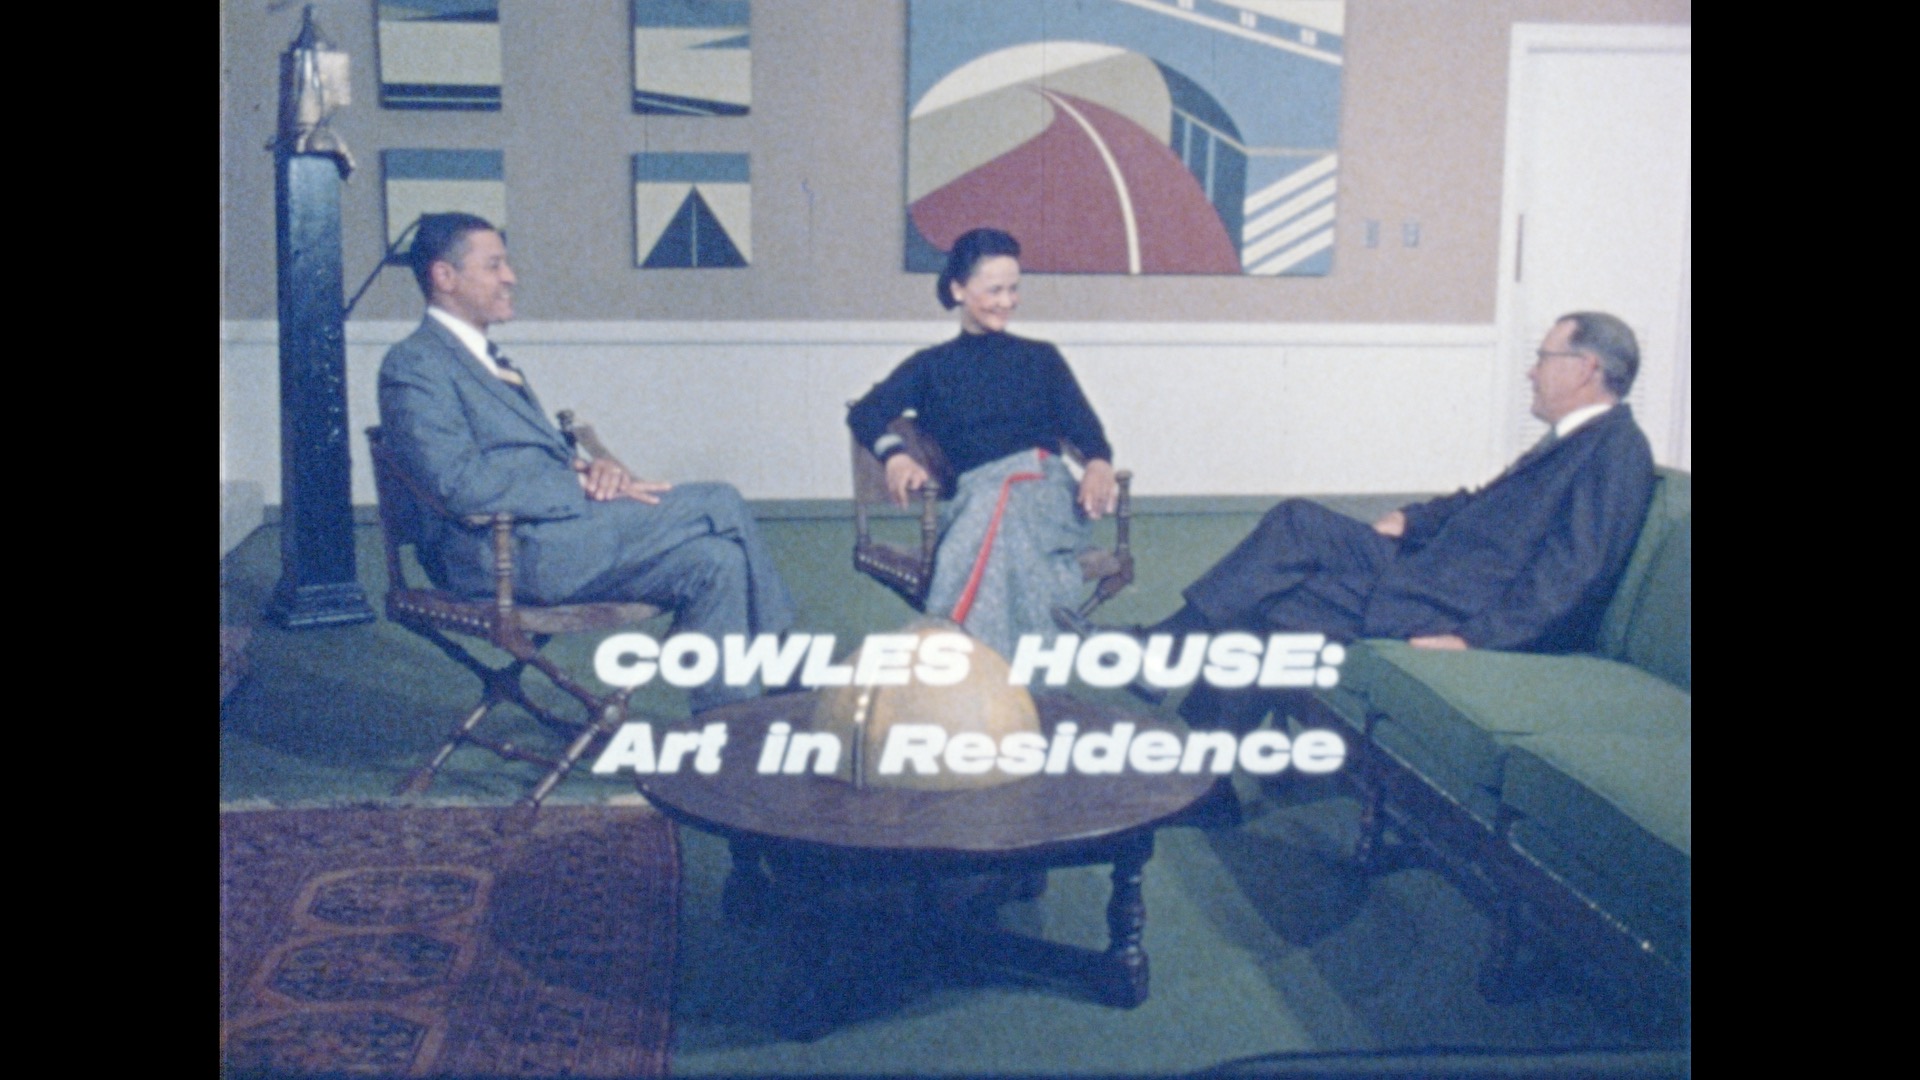 Cowles House: Art in Residence, 1971